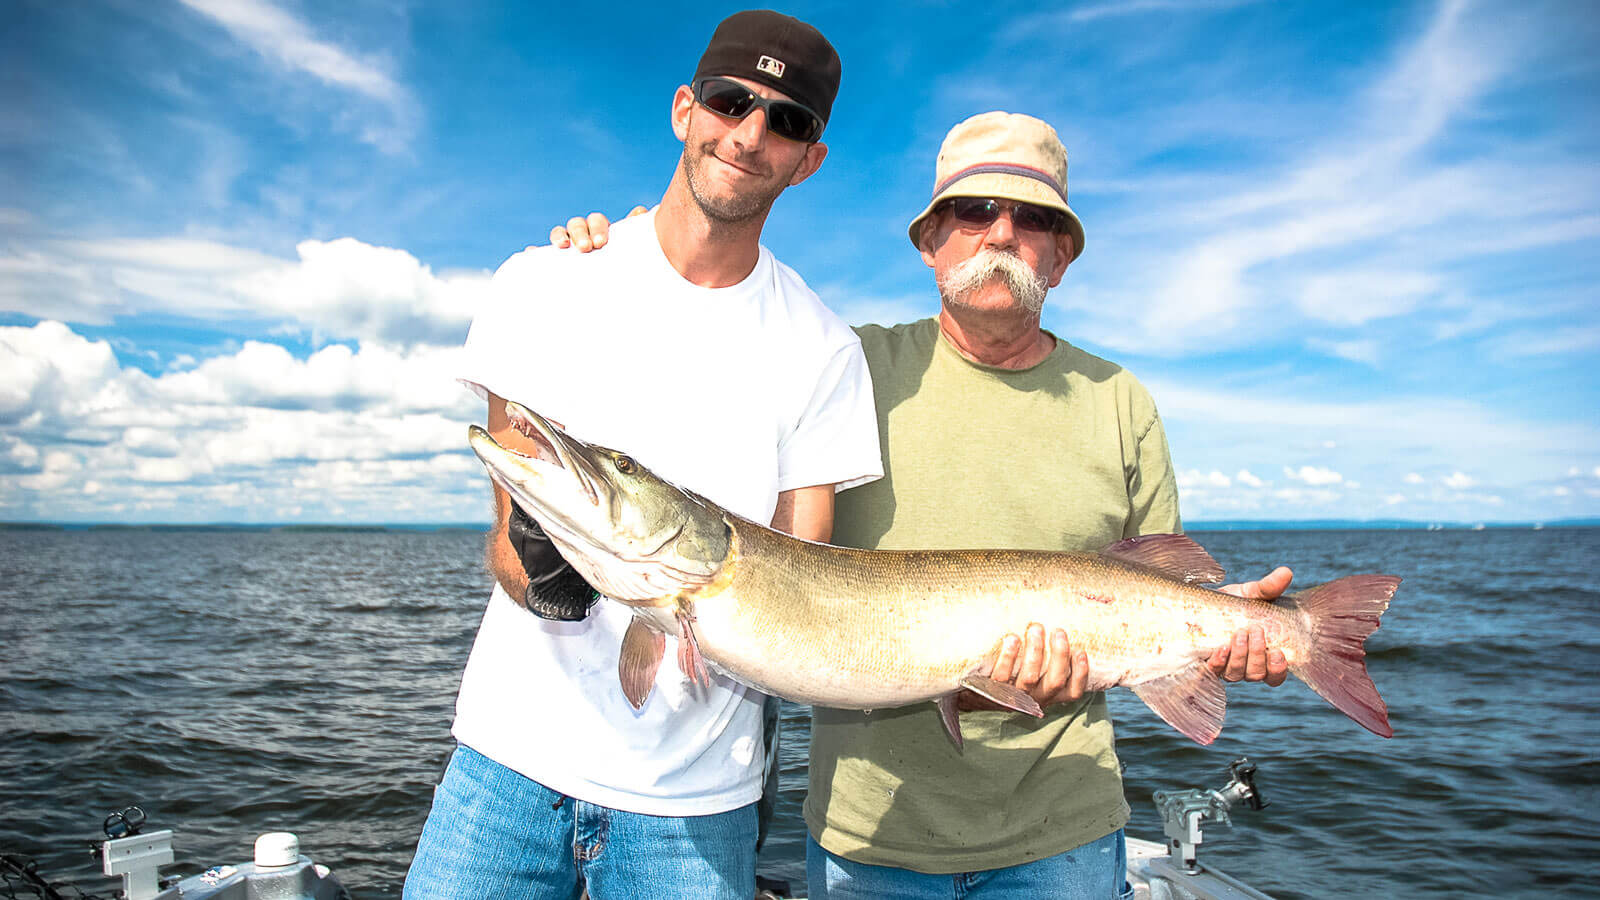 The Challenge of Musky Fishing - Feature Image - MuskyChasers.com